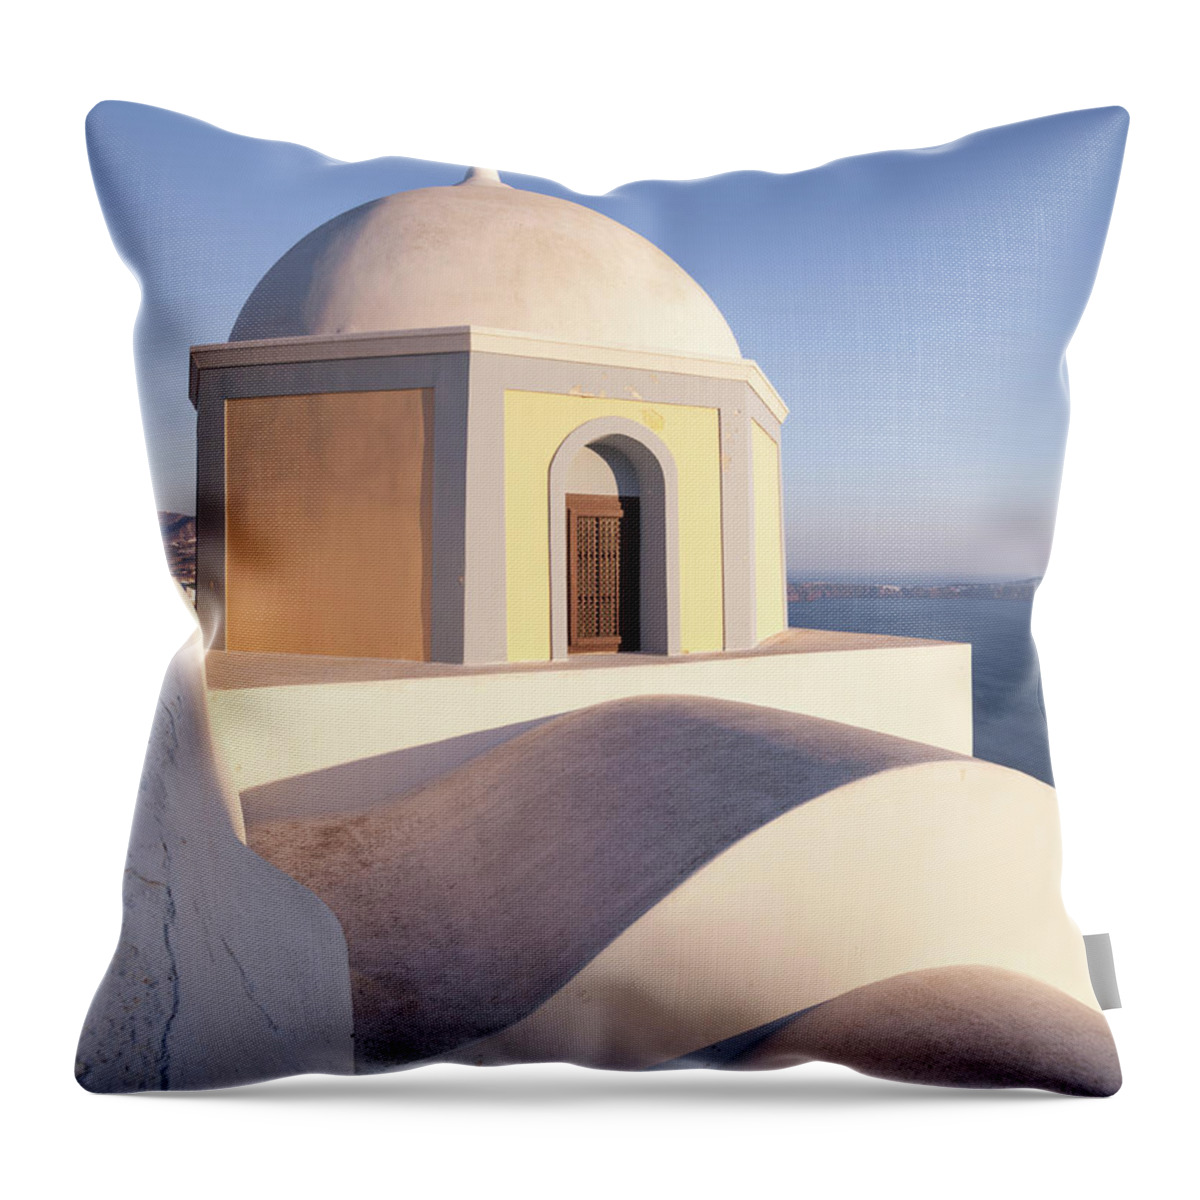 Tranquility Throw Pillow featuring the photograph Famous Orthodox Church At Sunset by Matteo Colombo